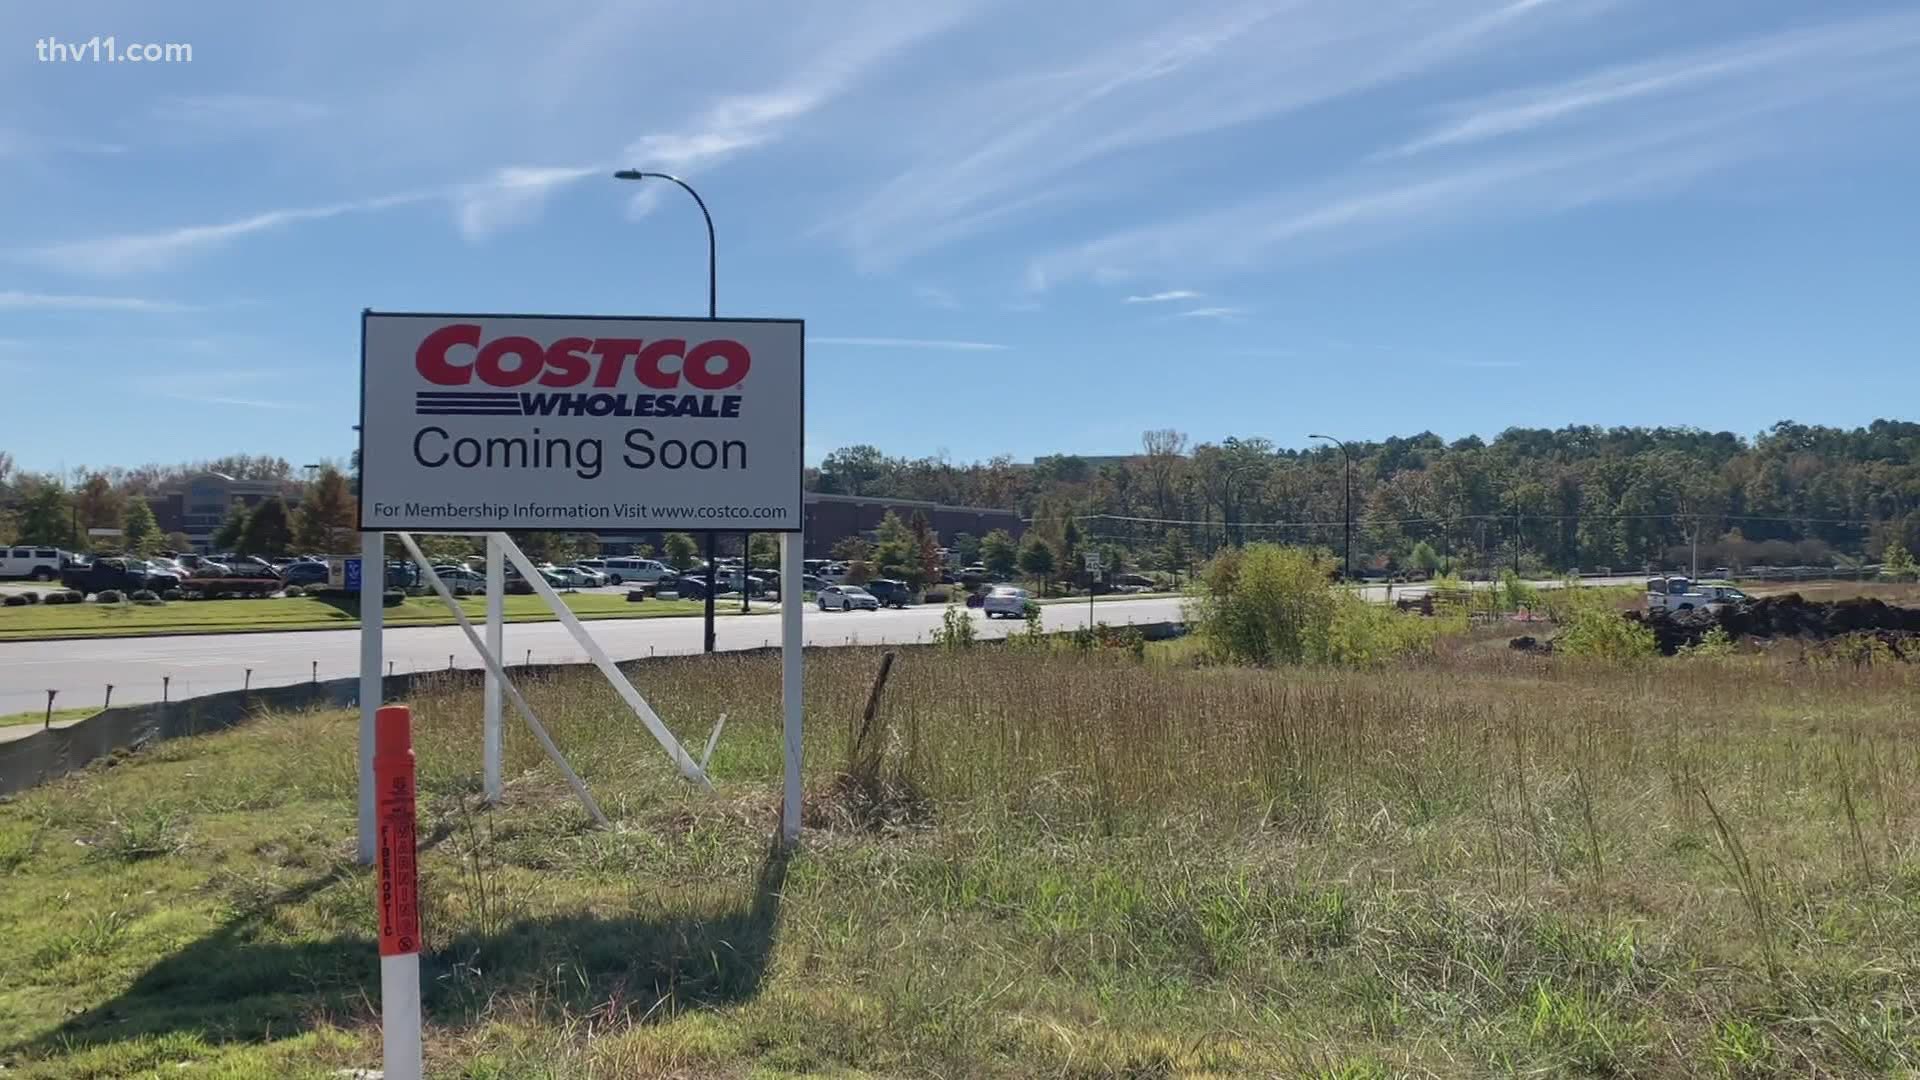 As people in central Arkansas patiently await the arrival of the state's first Costco, the retail giant is searching for people to work at the new location.